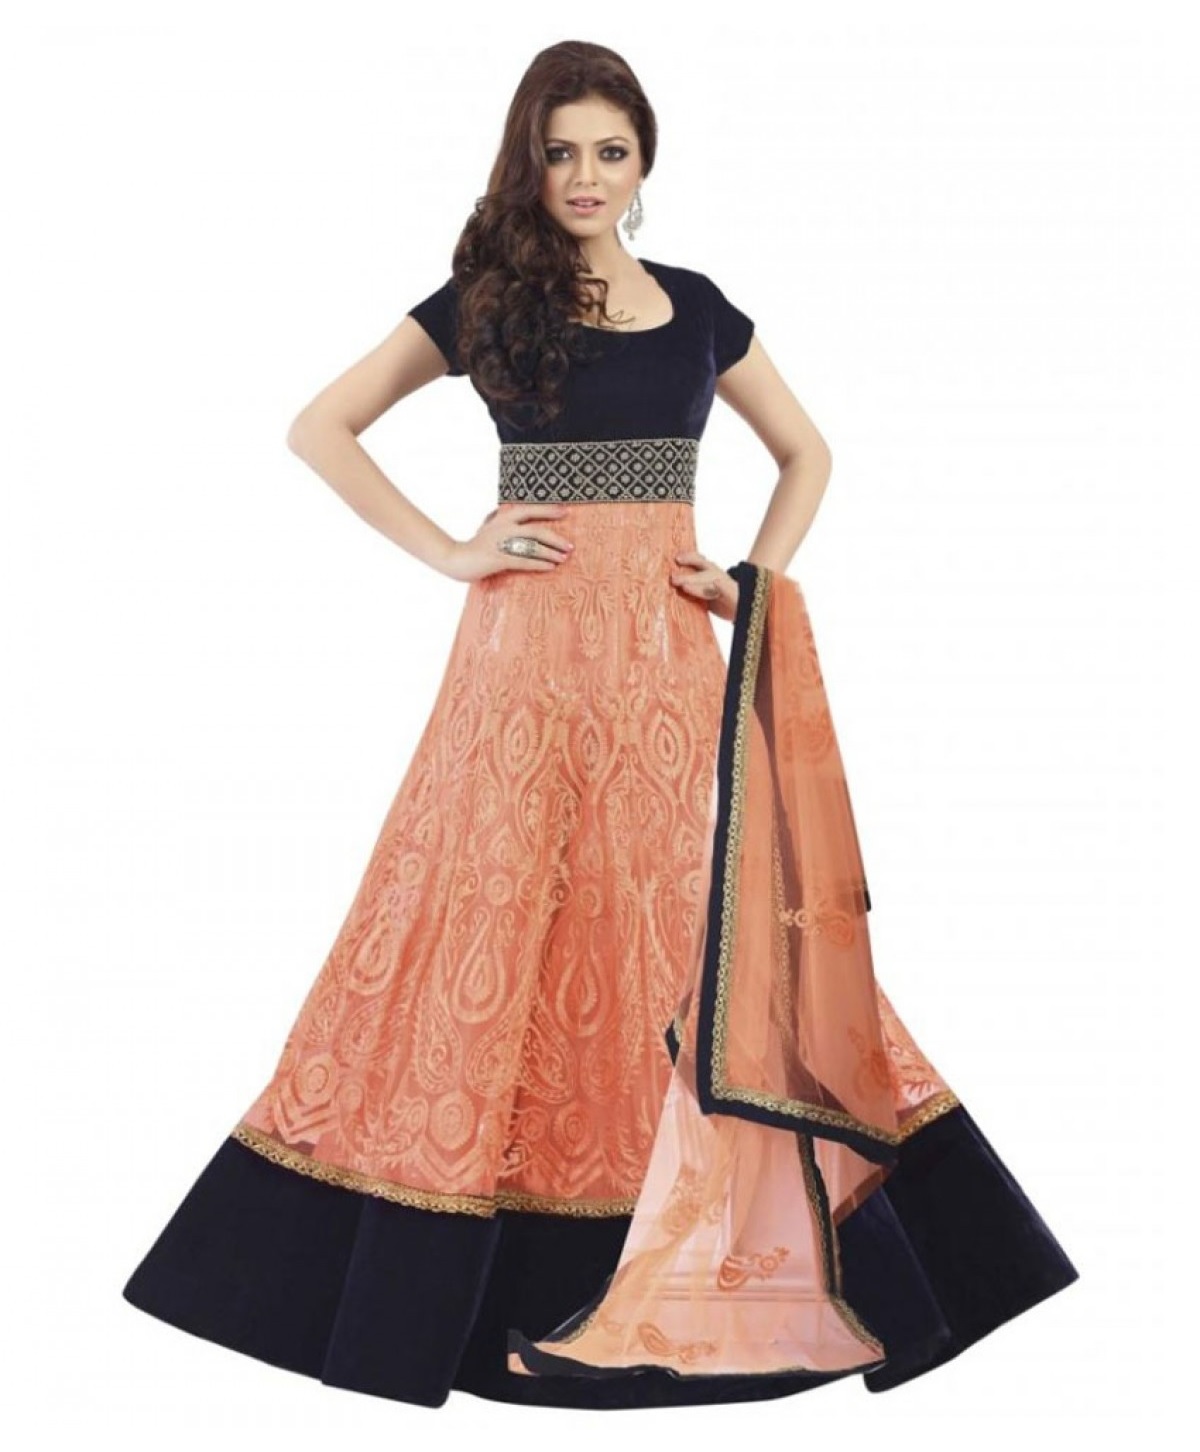 Need a Salwar Suit Variety to Wear to A Formal Occasion? Here Are Some Picks